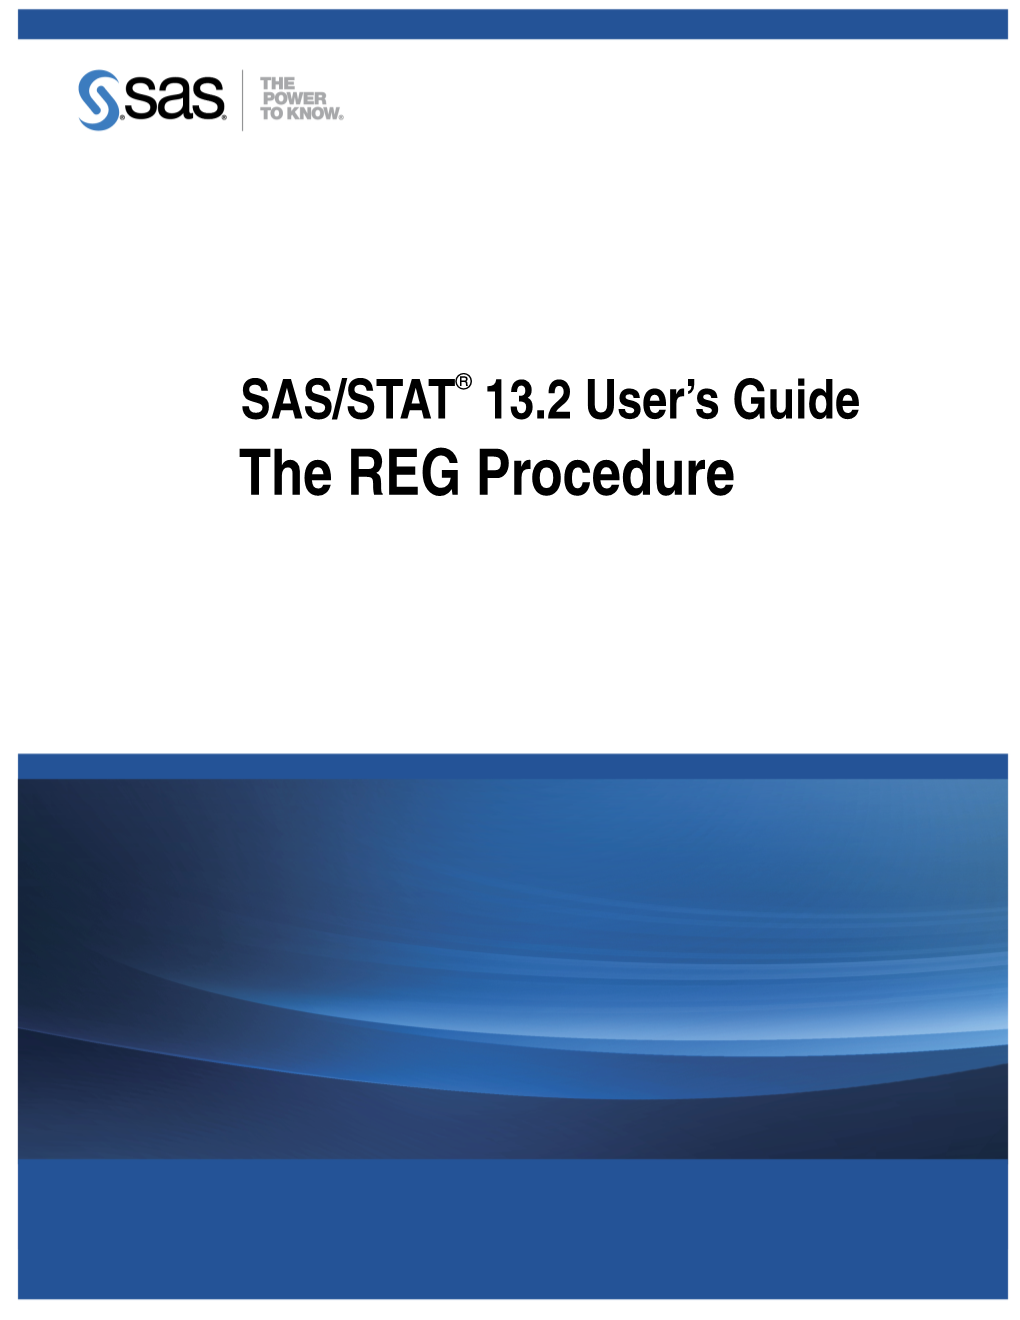 SAS/STAT® 13.2 User’S Guide the REG Procedure This Document Is an Individual Chapter from SAS/STAT® 13.2 User’S Guide